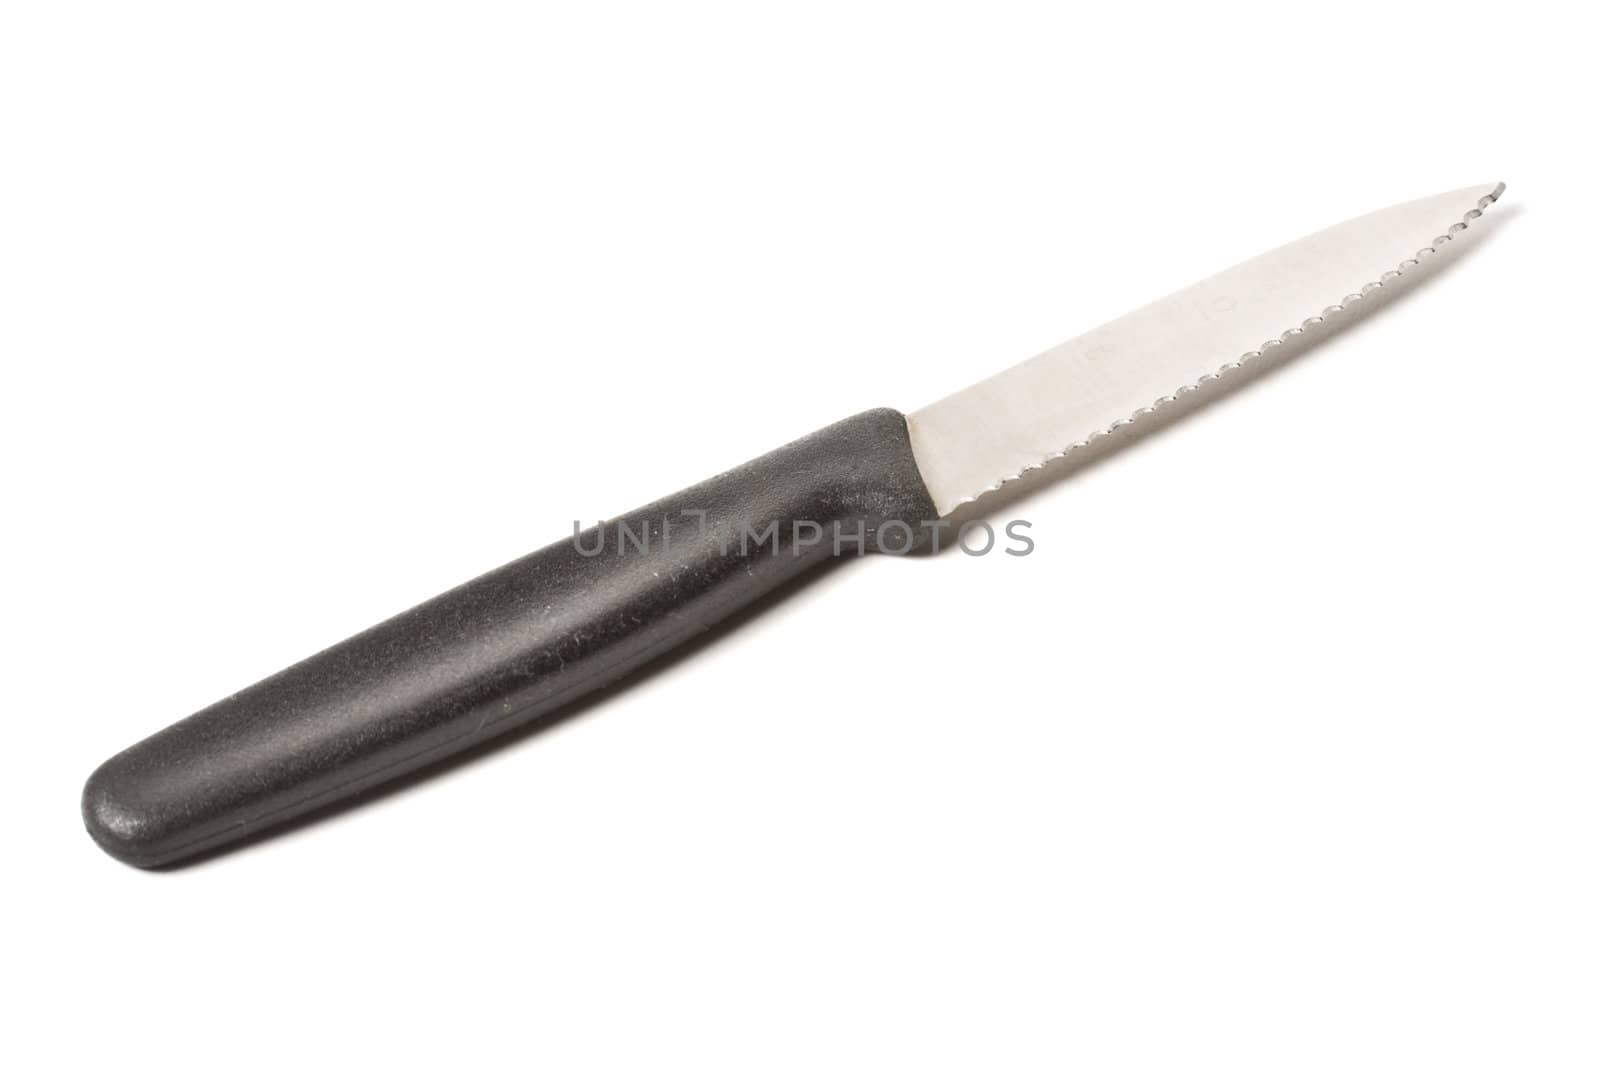 Kitchen knife isolated by dimol